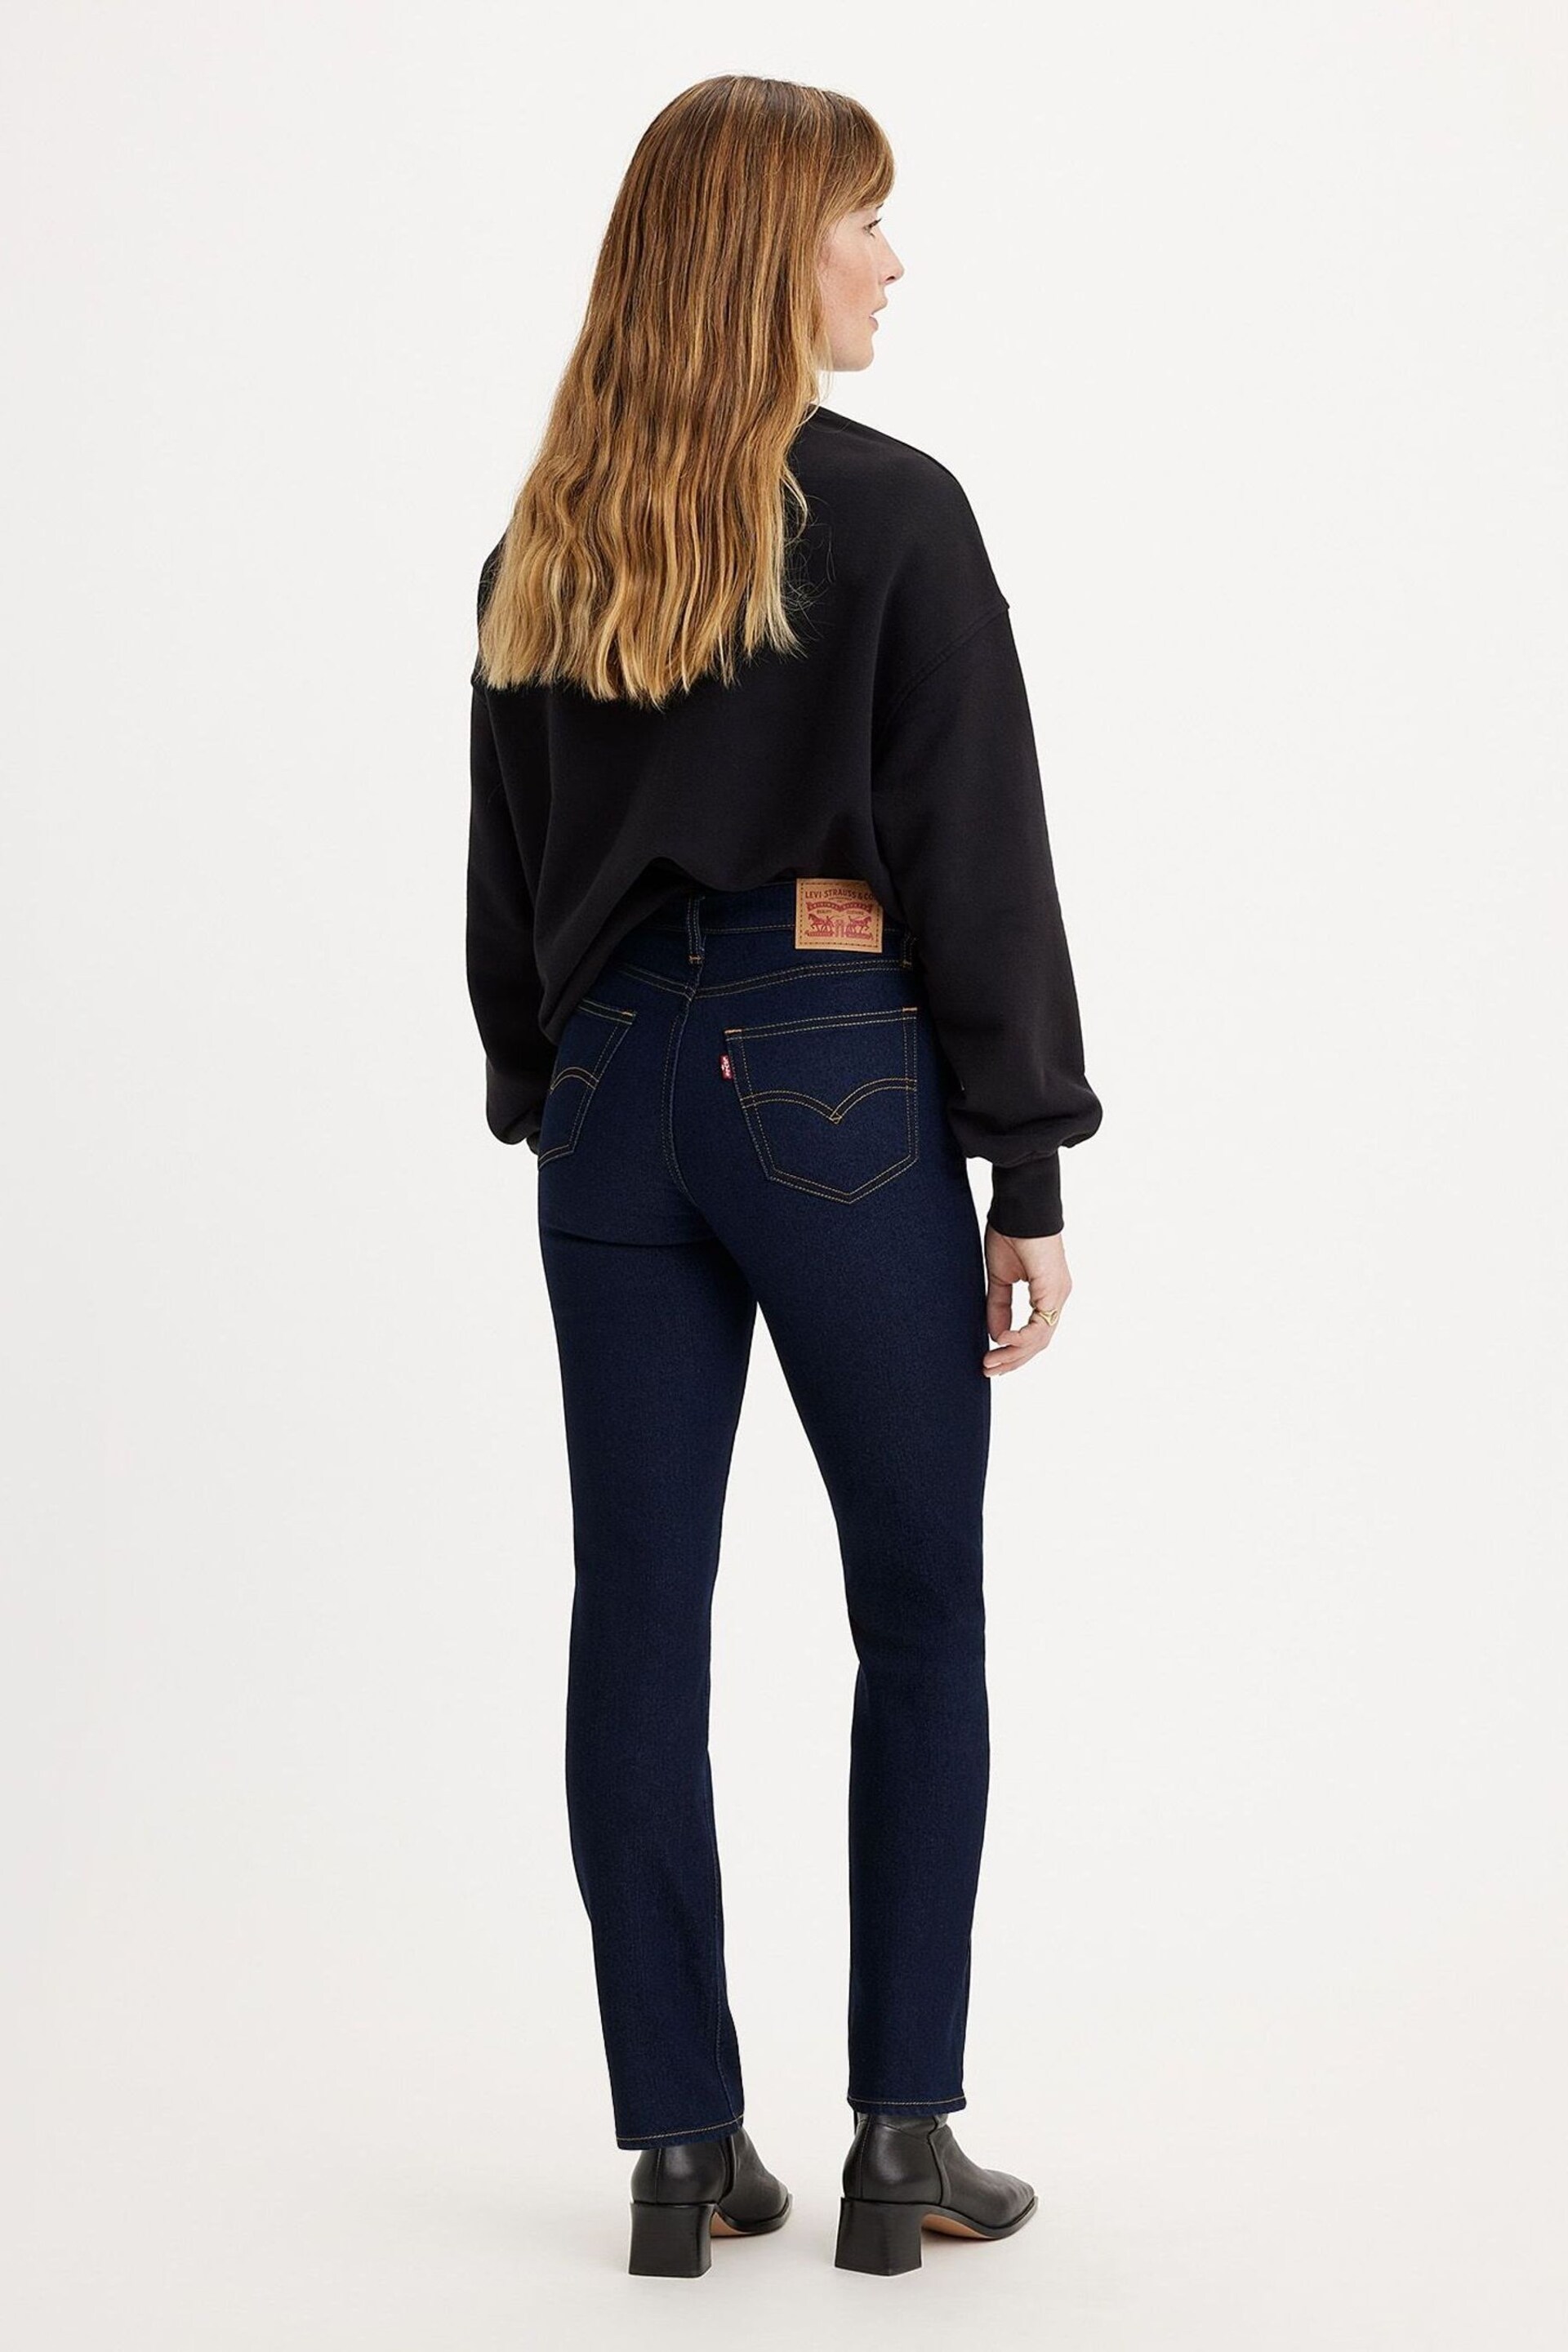 Levi's® Cast Shadows 724 High Rise Straight Jeans - Image 1 of 3